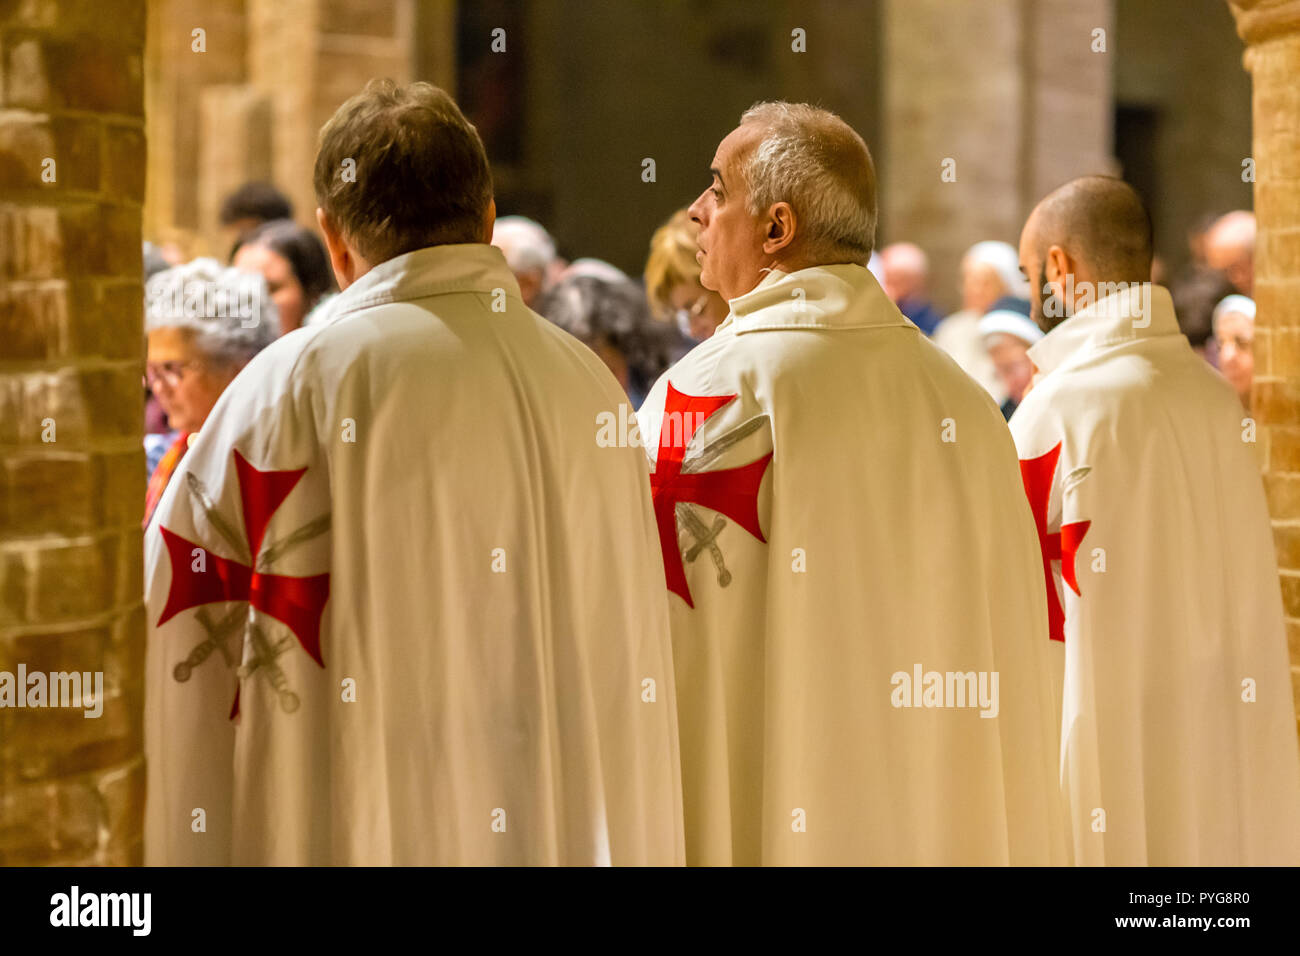 Forli, Italy.  26th October, 2018. Catholic Templar Knights participate in the ritual of Holy Mass during Feast of the Patron Saint. Heirs of the ancient Templar Order suppressed in 1312, Catholic Templars are a private association of faithful Catholics, internally organised as a traditional Christian chivalric order. GoneWithTheWind/Alamy Live News Stock Photo